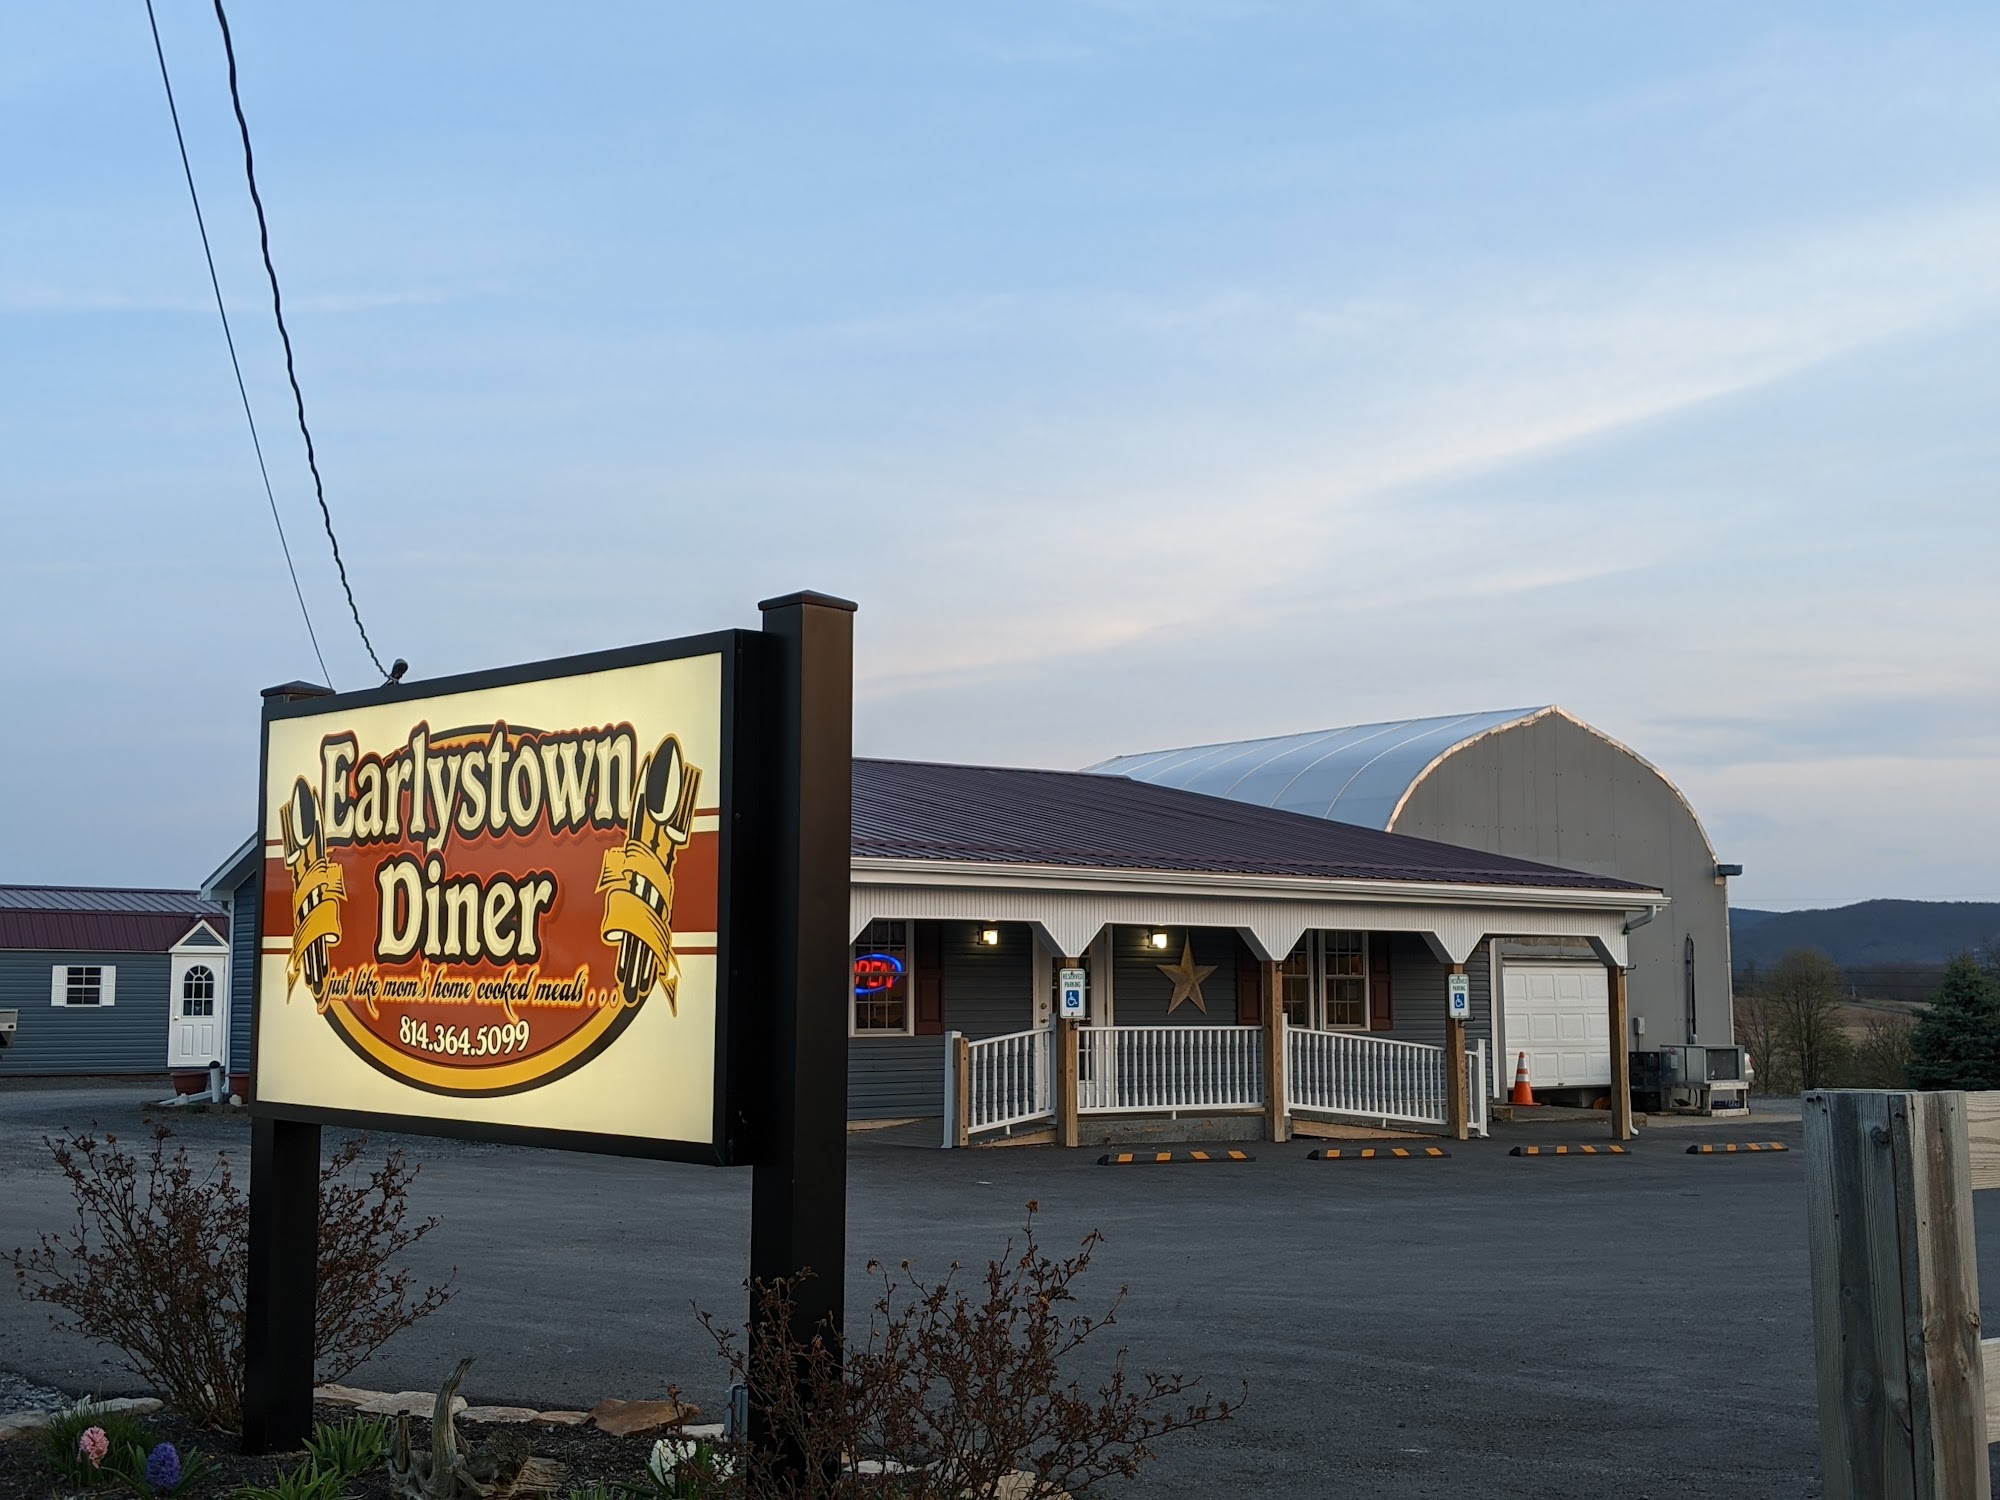 Earlystown Diner